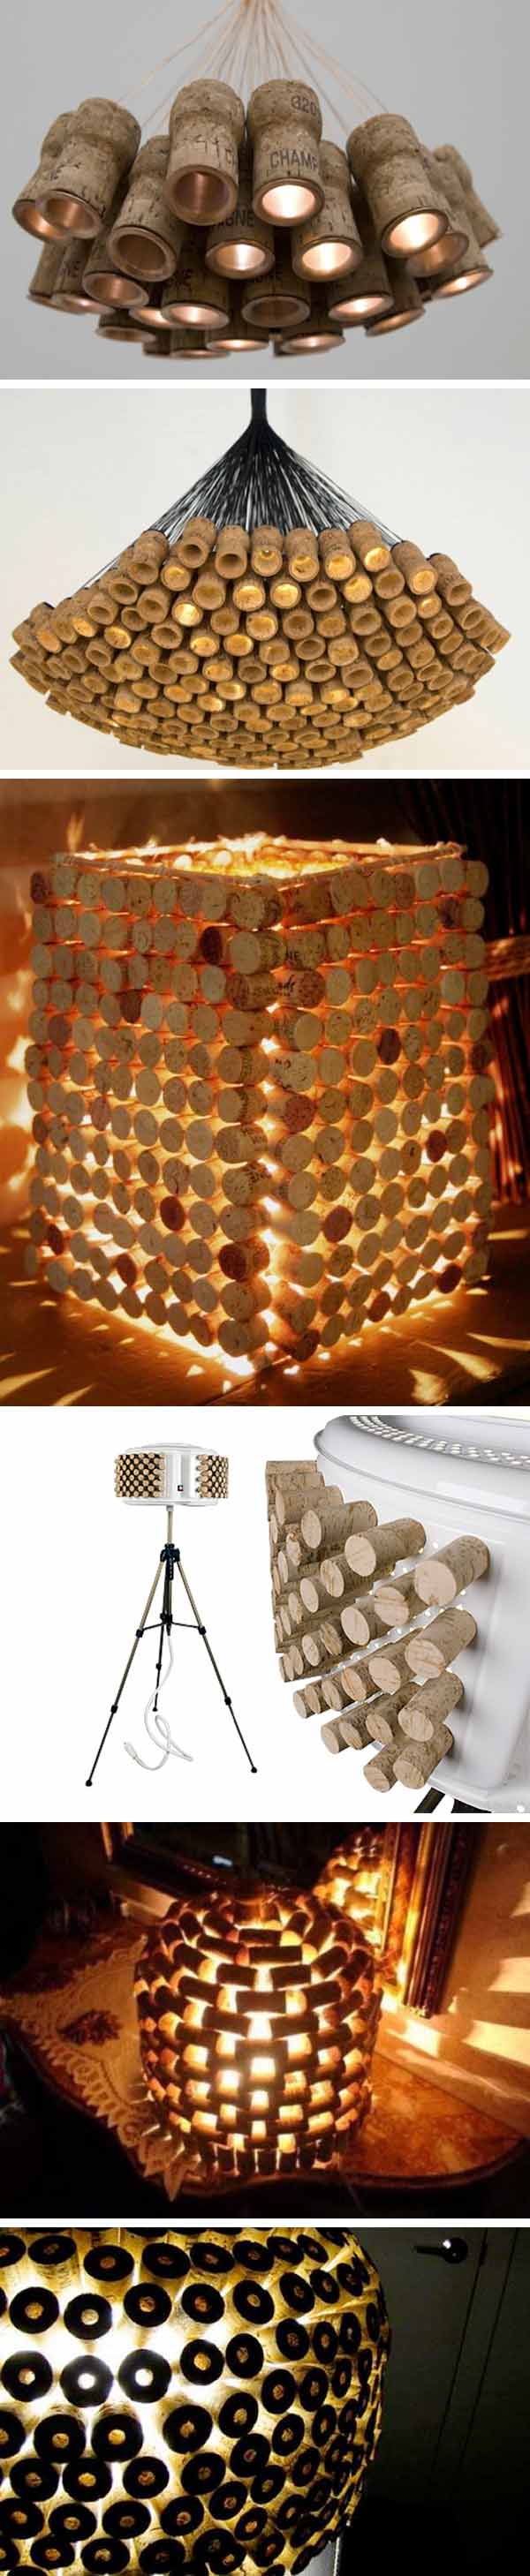 recycle corks - lamps